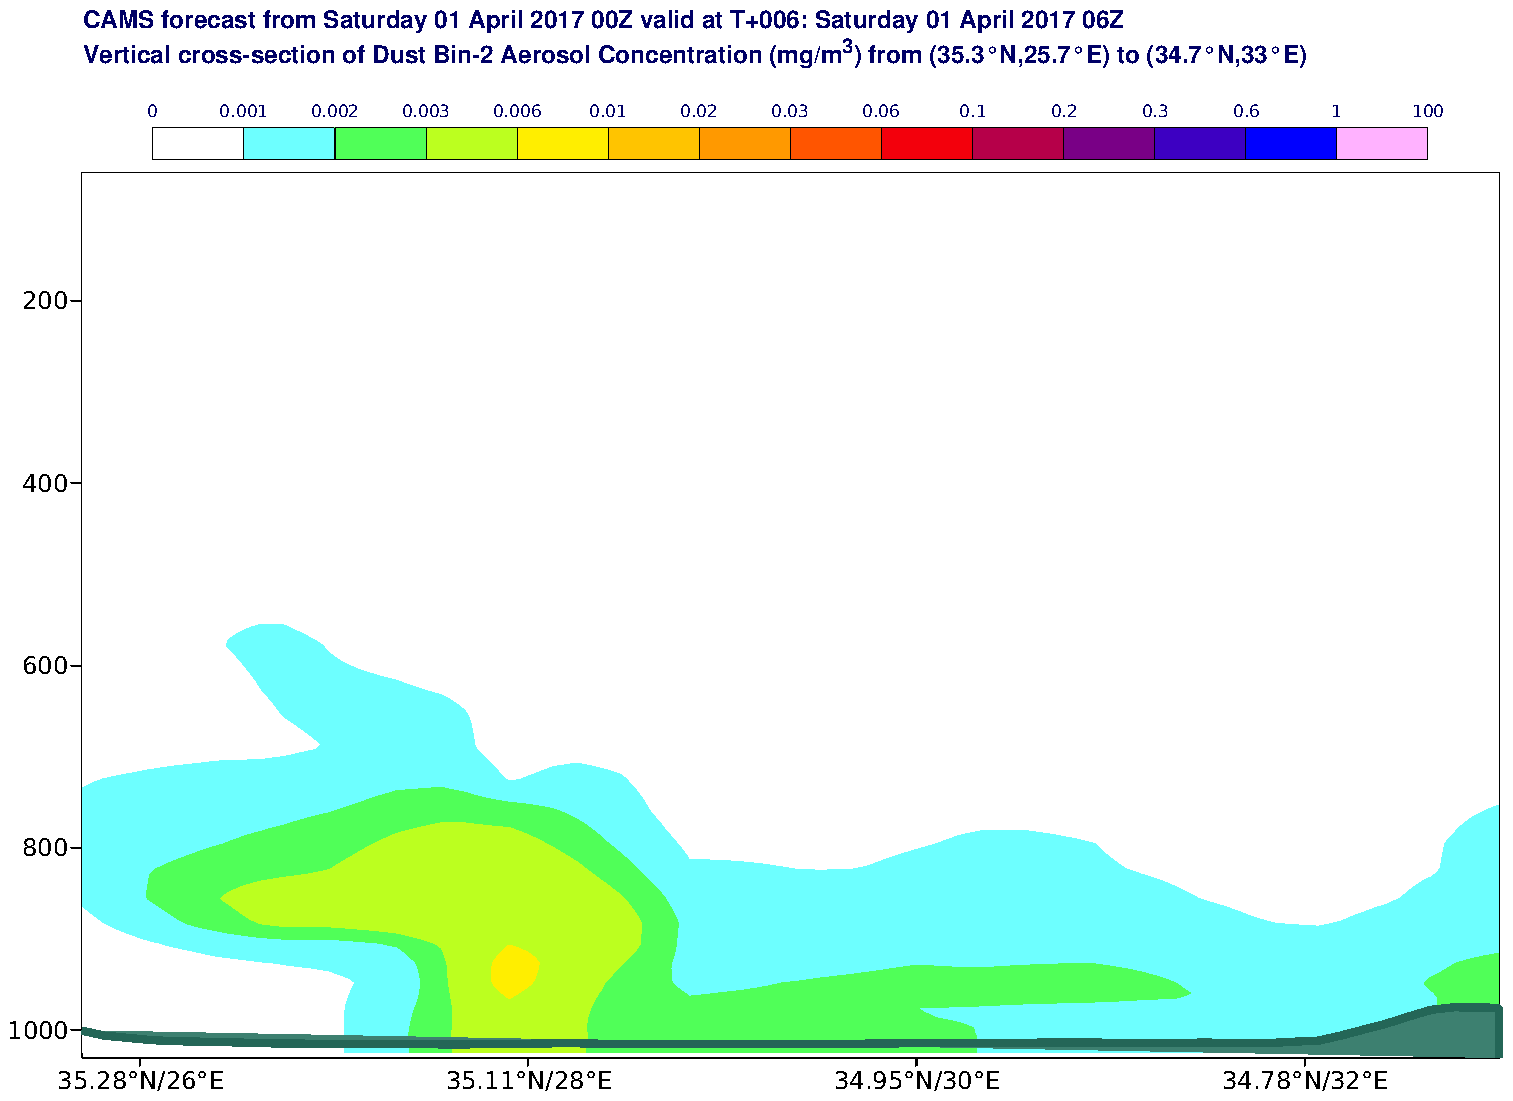 Vertical cross-section of Dust Bin-2 Aerosol Concentration (mg/m3) valid at T6 - 2017-04-01 06:00